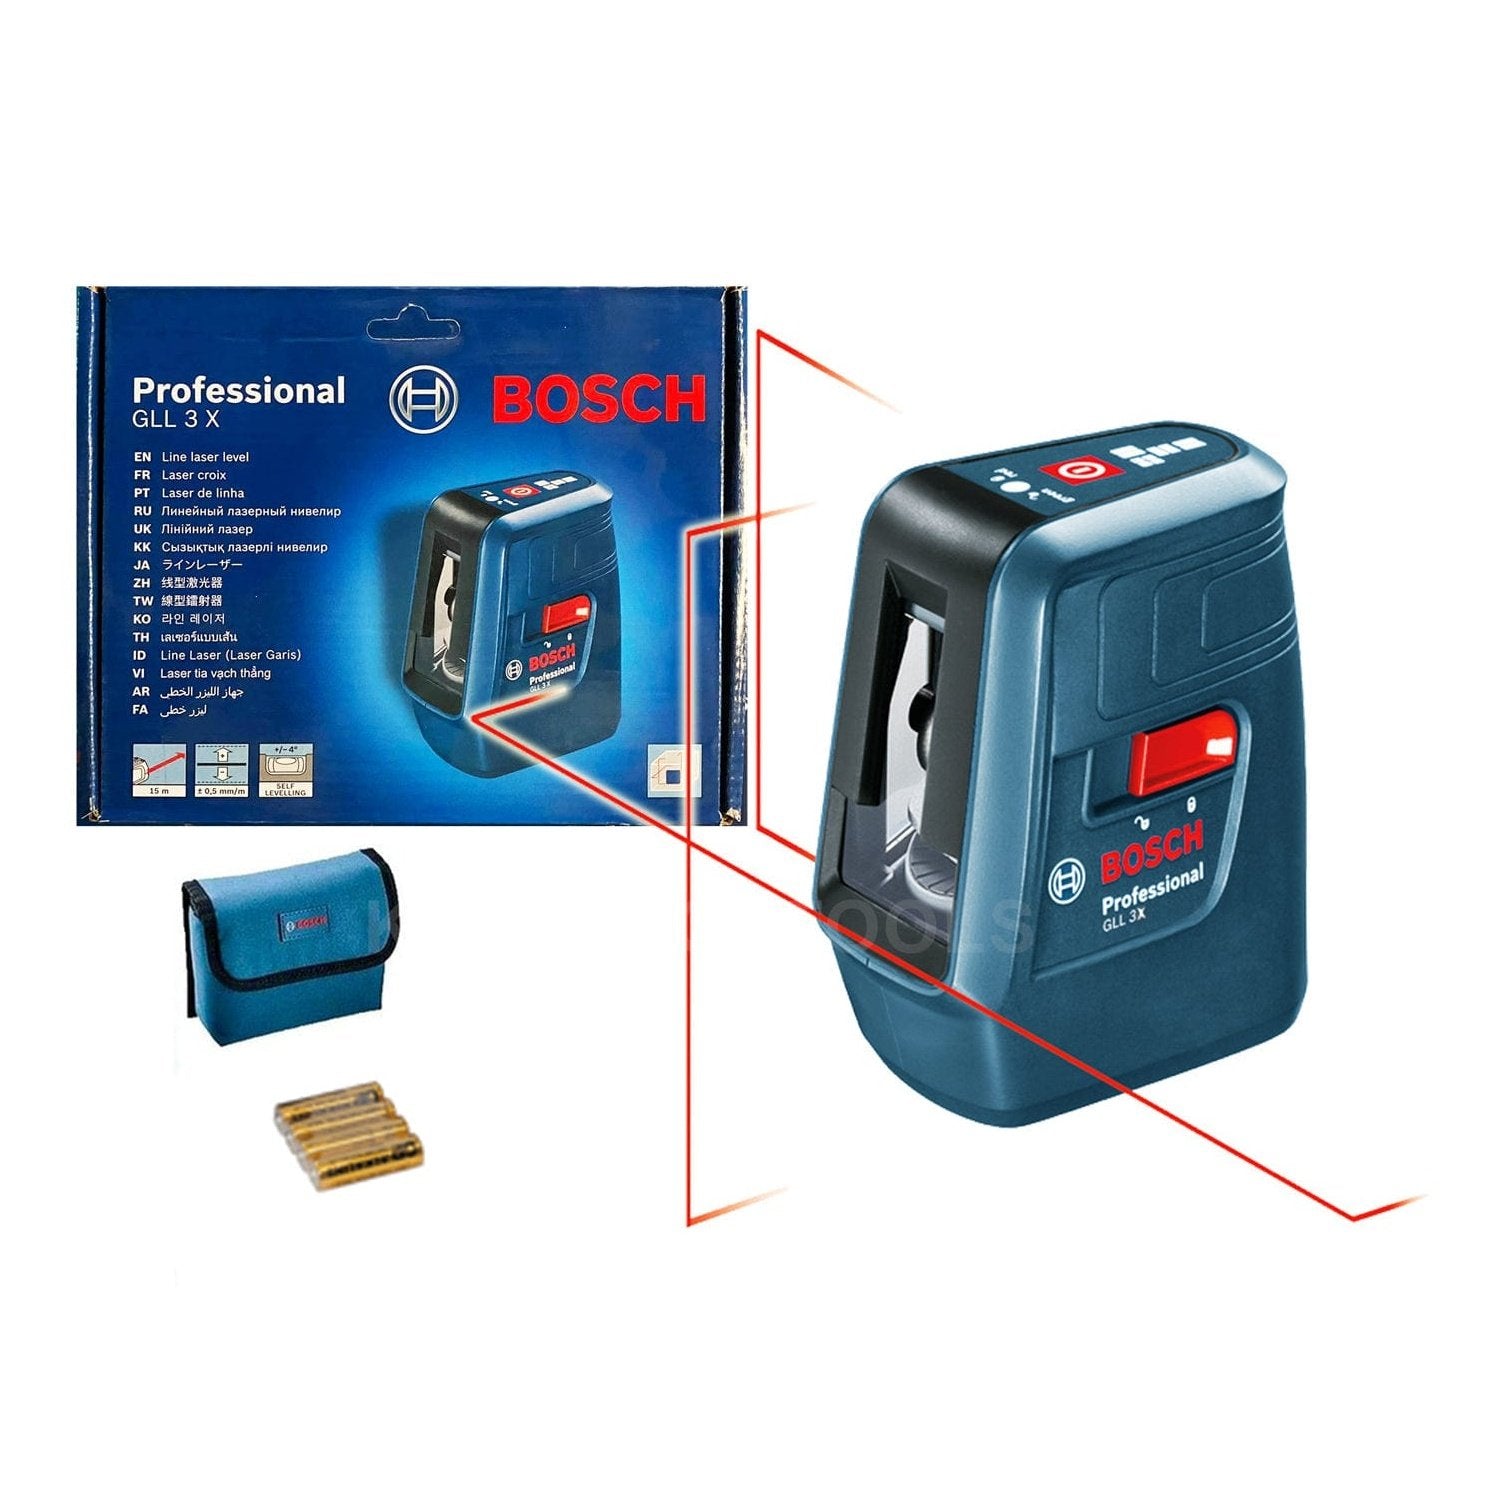 Enhance your leveling precision with the Bosch Professional 15m Line Laser Level (GLL 3 X) at SupplyMaster.store in Ghana. Digital Meter Buy Tools hardware Building materials